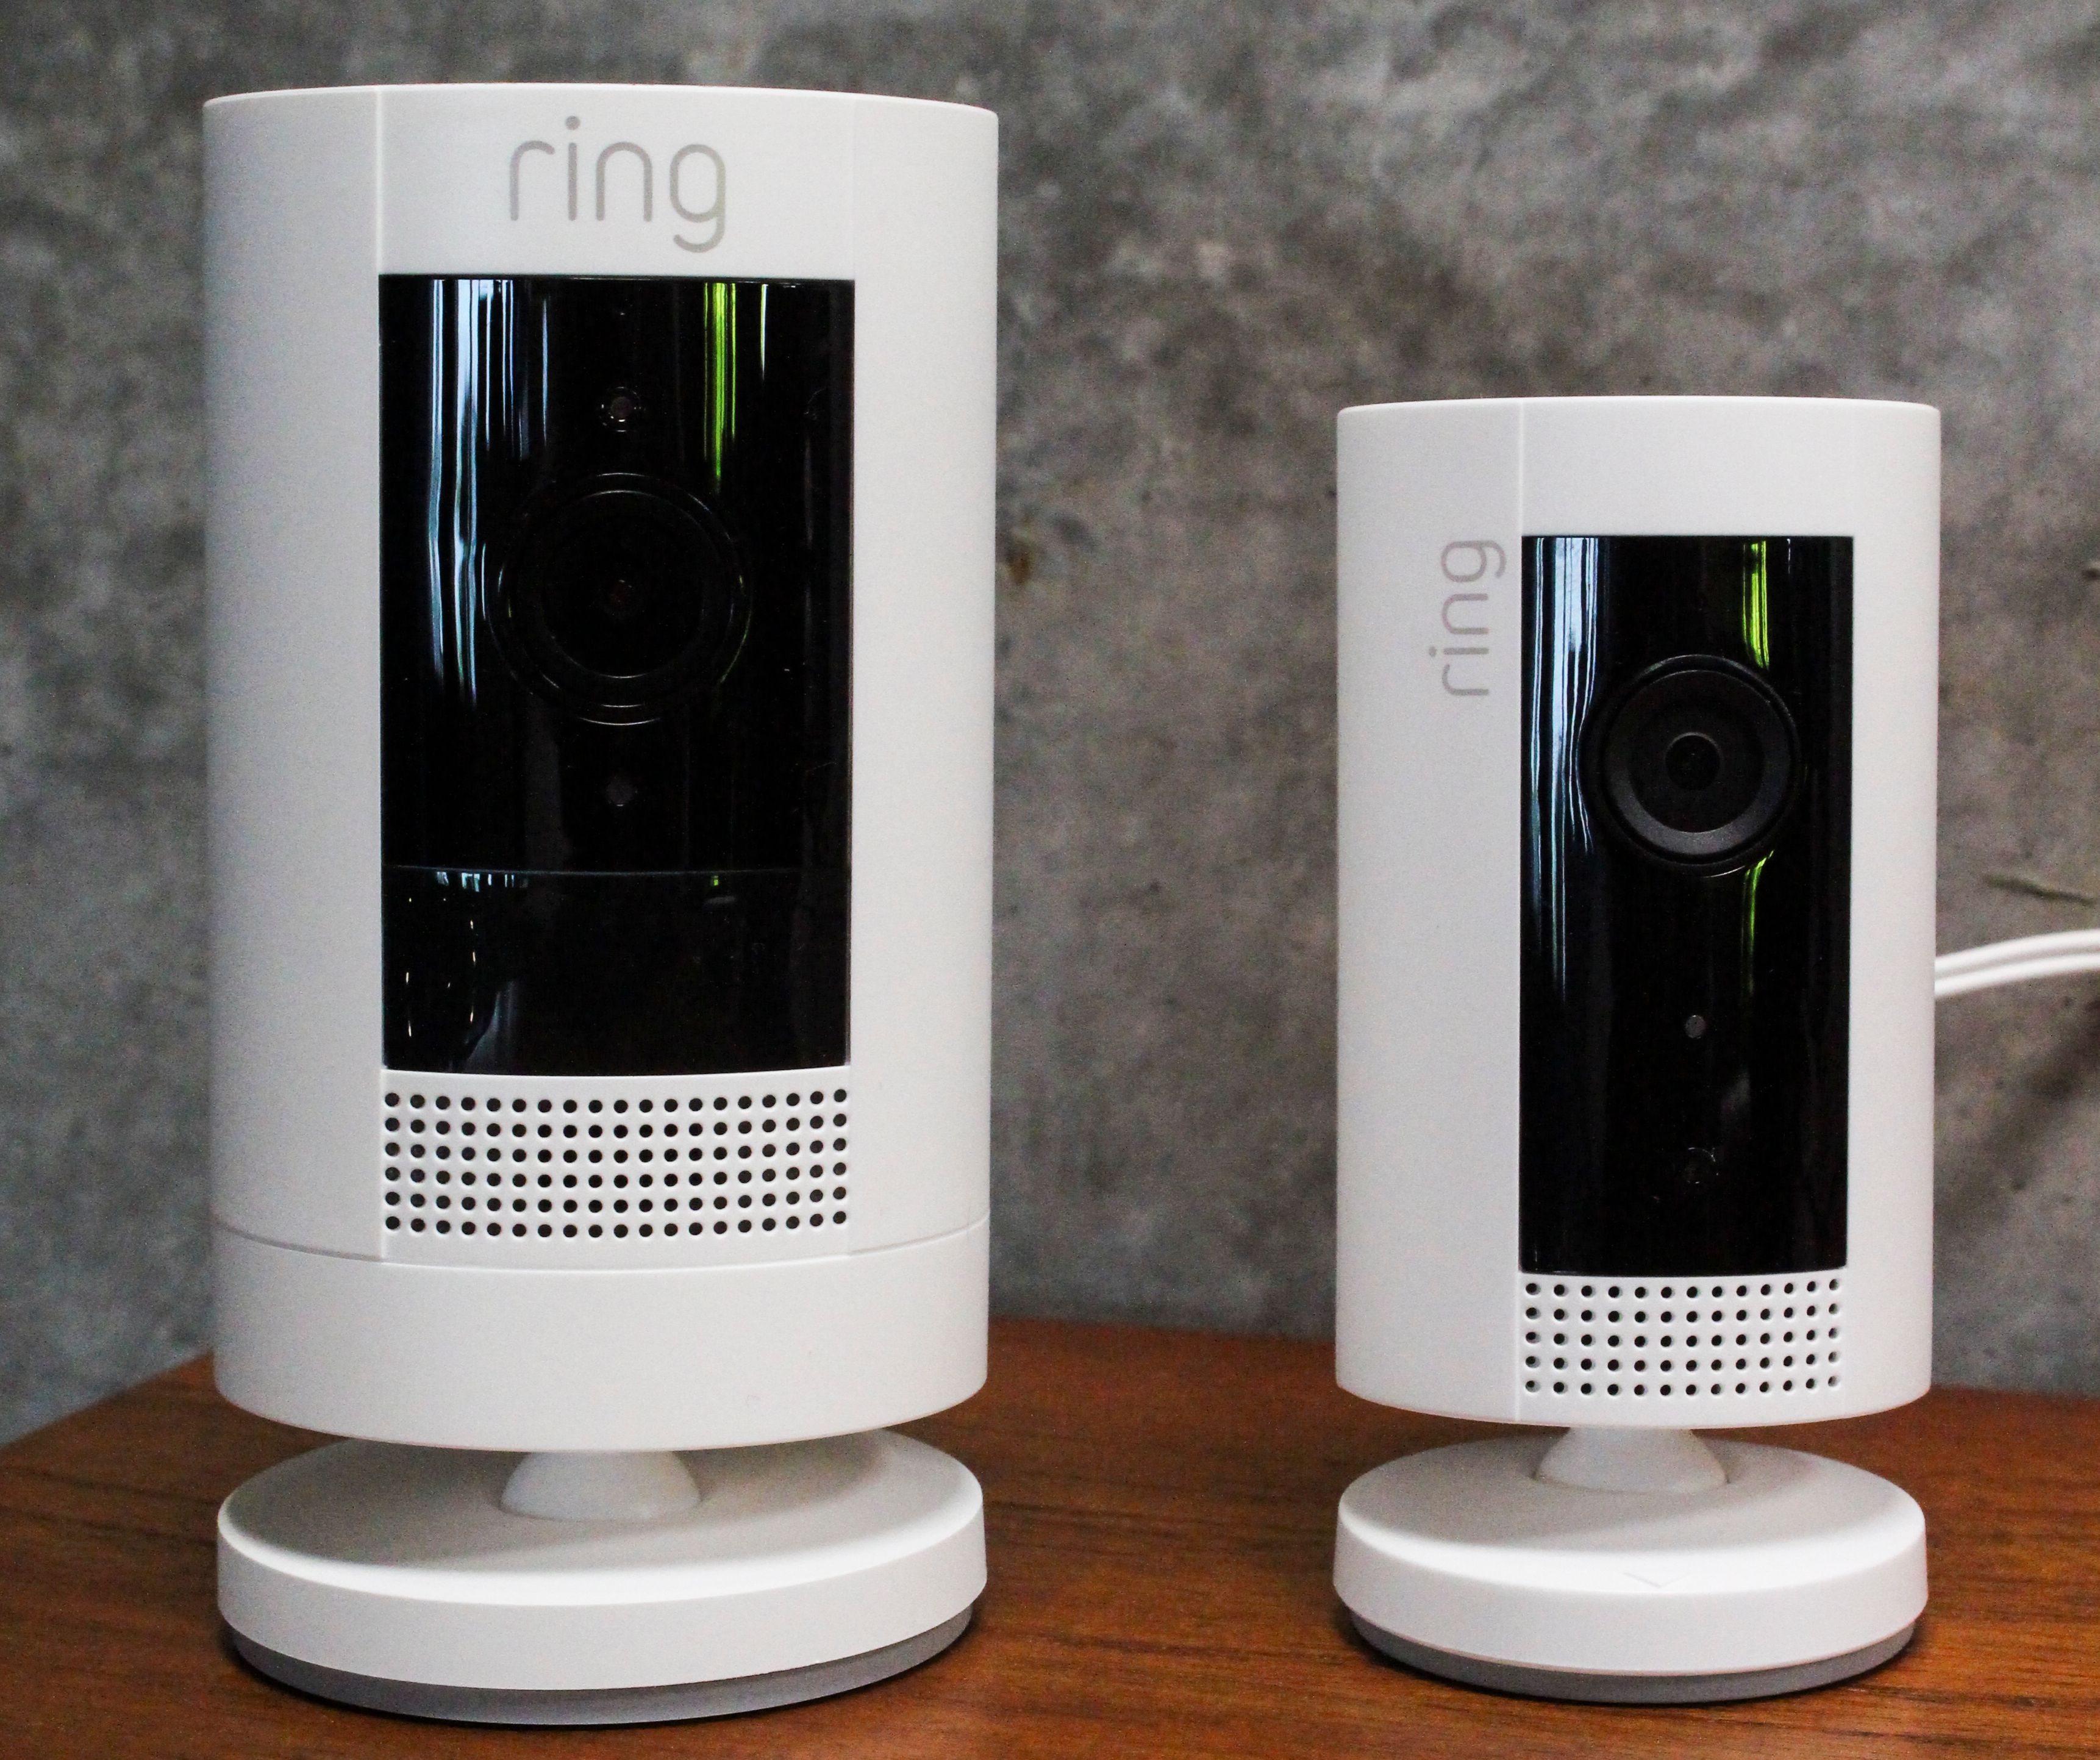 Ring No Longer Sharing Home Security Footage With Police, Company  Says - CNET